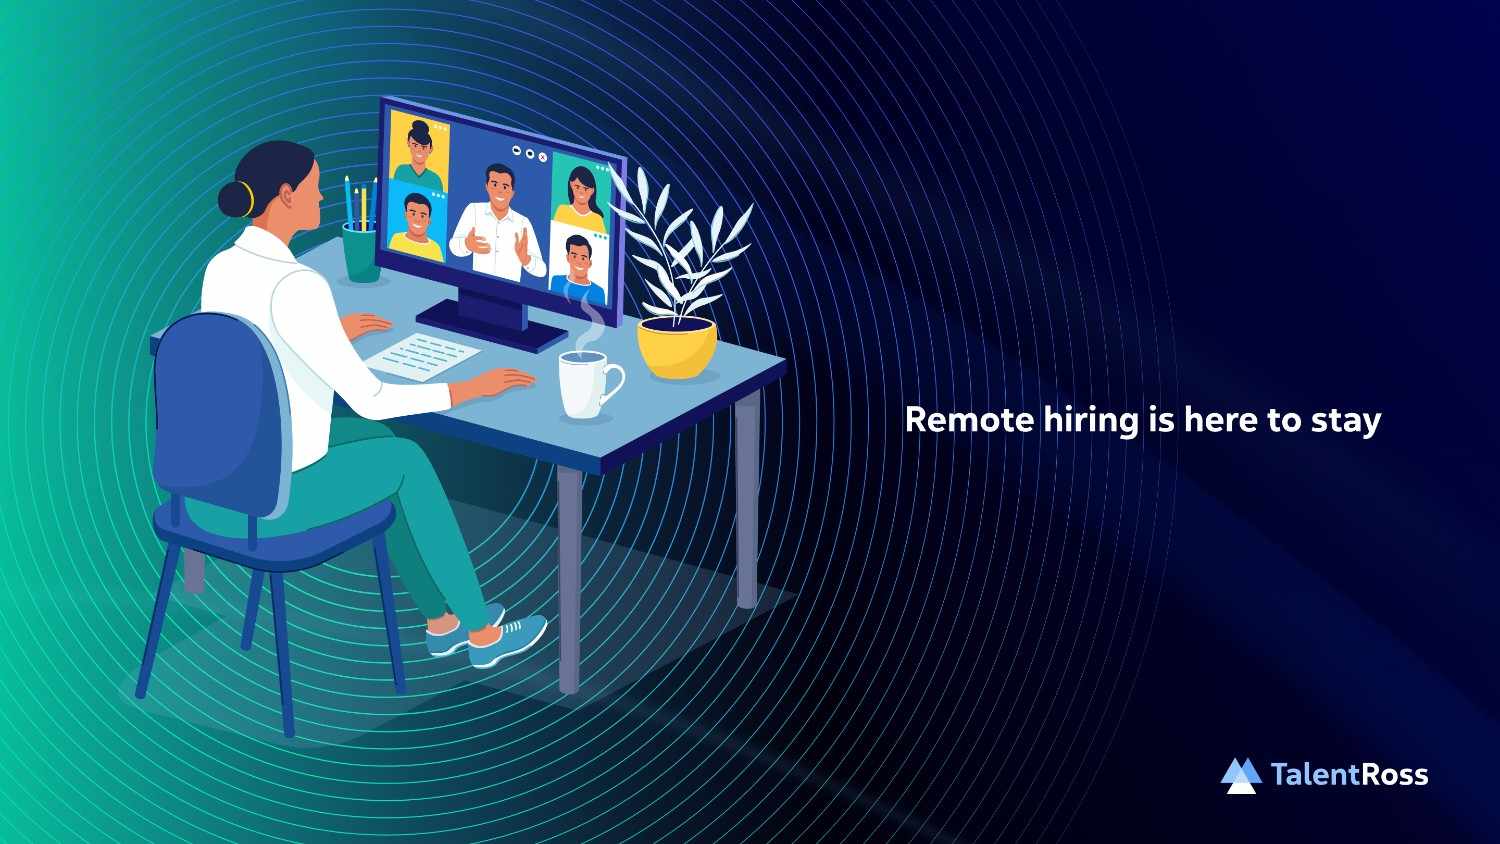 Remote hiring is here to stay